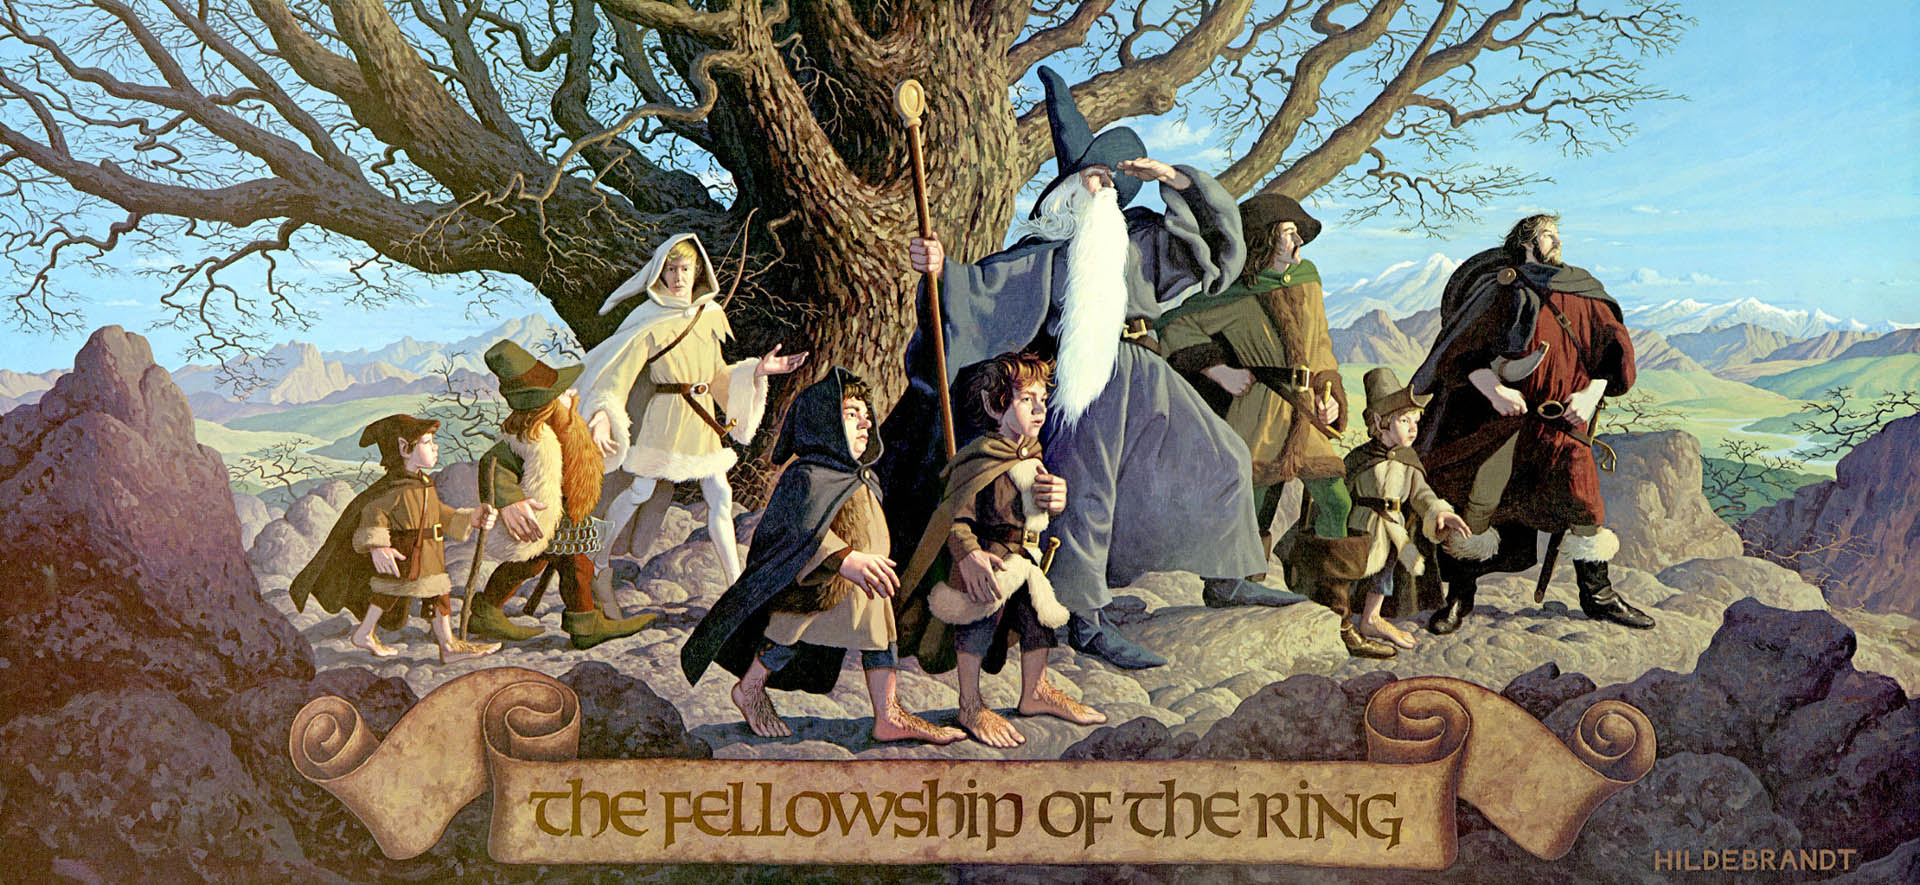 Free download The Fellowship Of The Ring Fantasy Lord Of The Rings